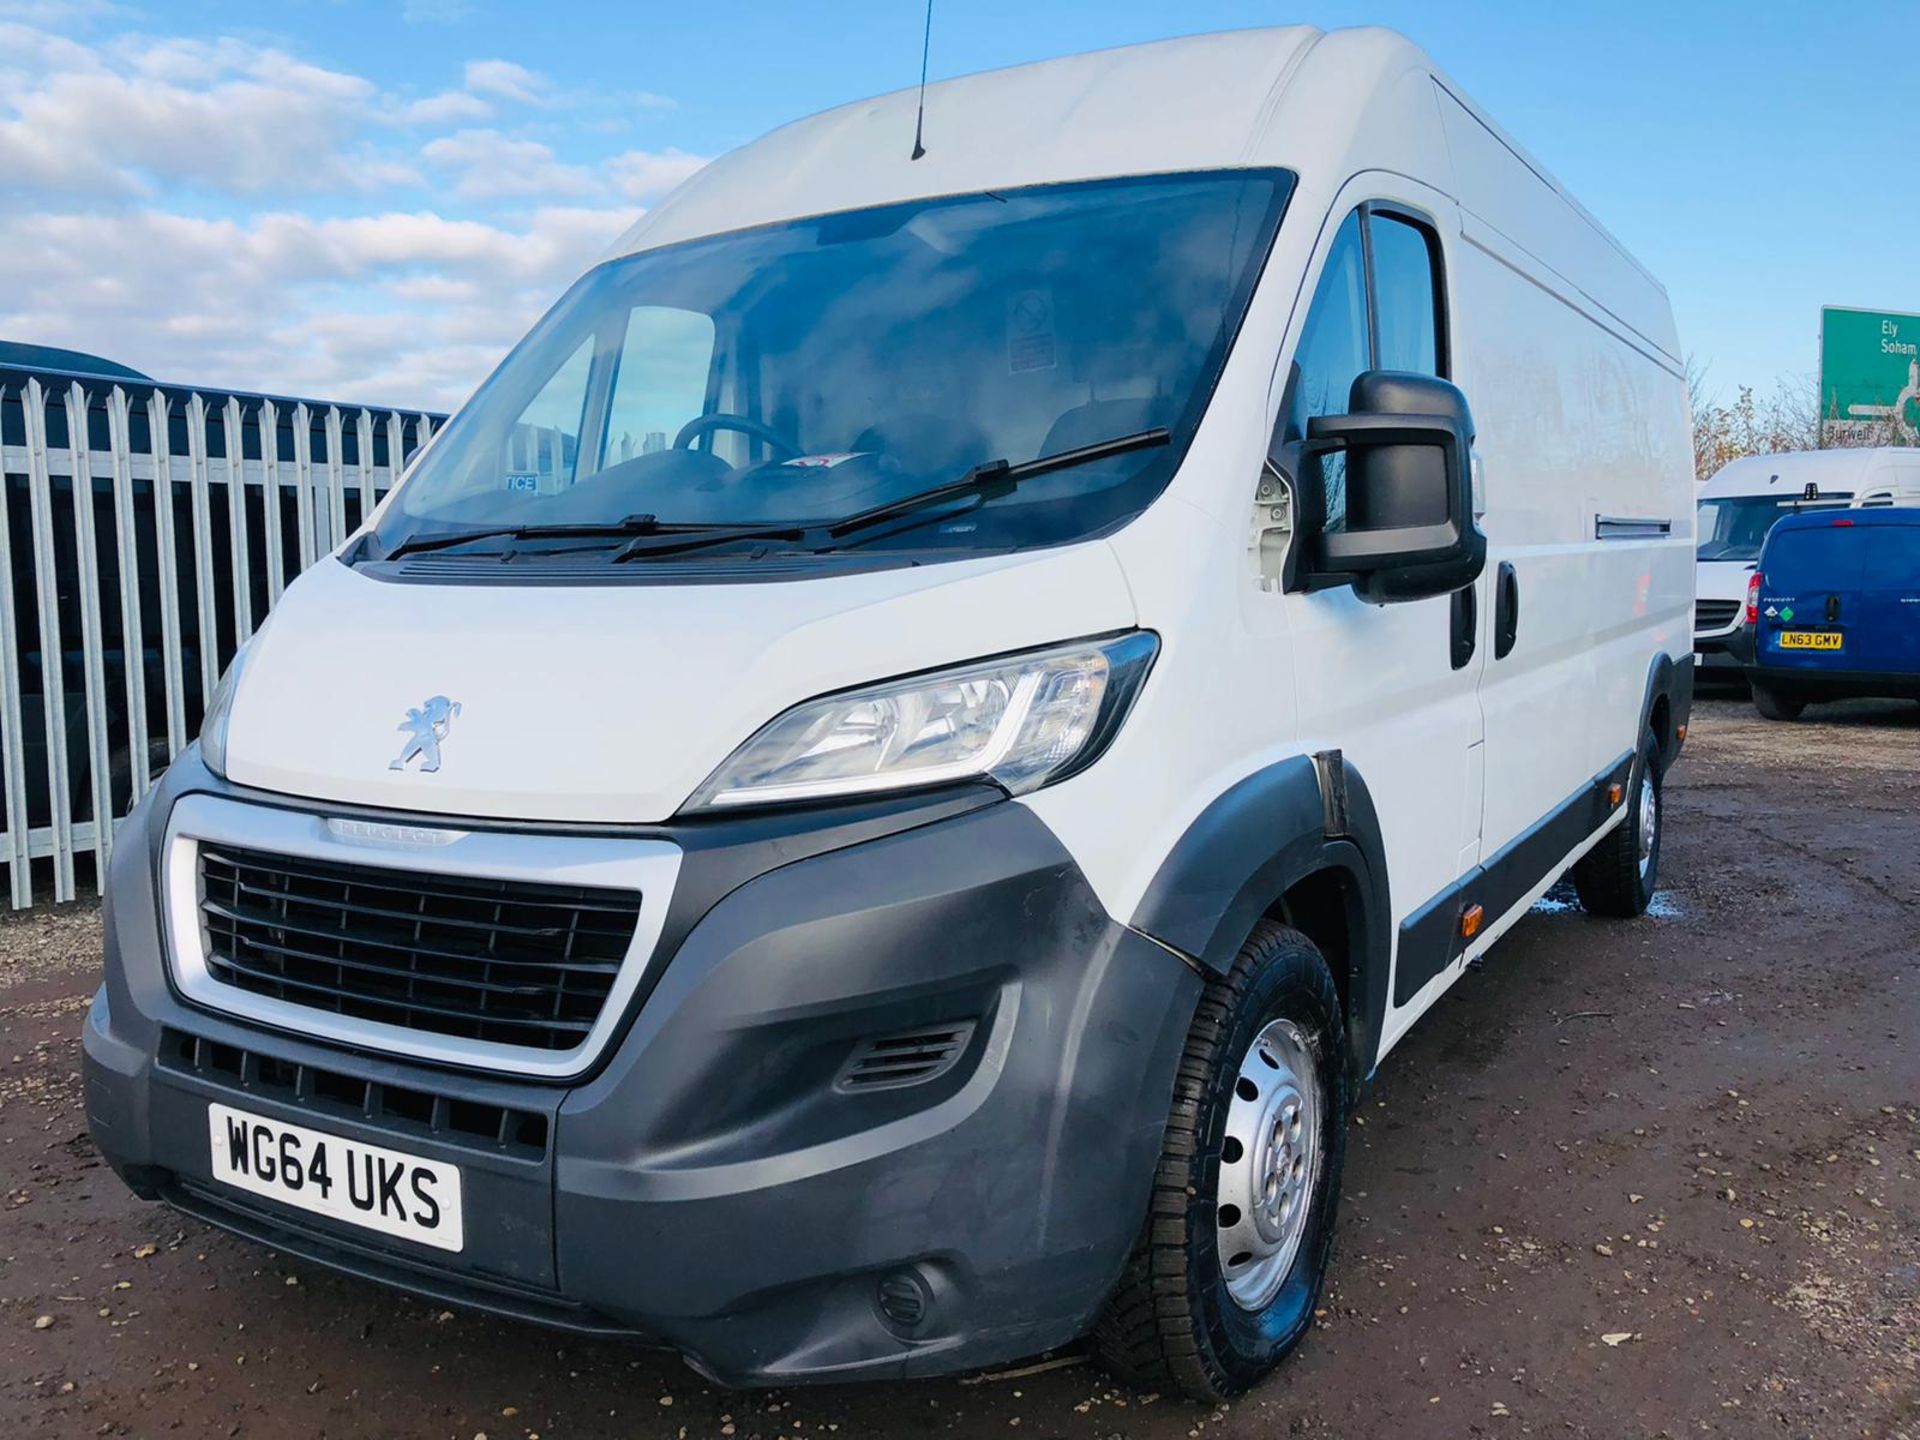 Peugeot Boxer 2.2 HDI 435 Professional L4 H2 2014 '64 Reg' Sat Nav - Air Con - Only Done 76K - Image 5 of 24